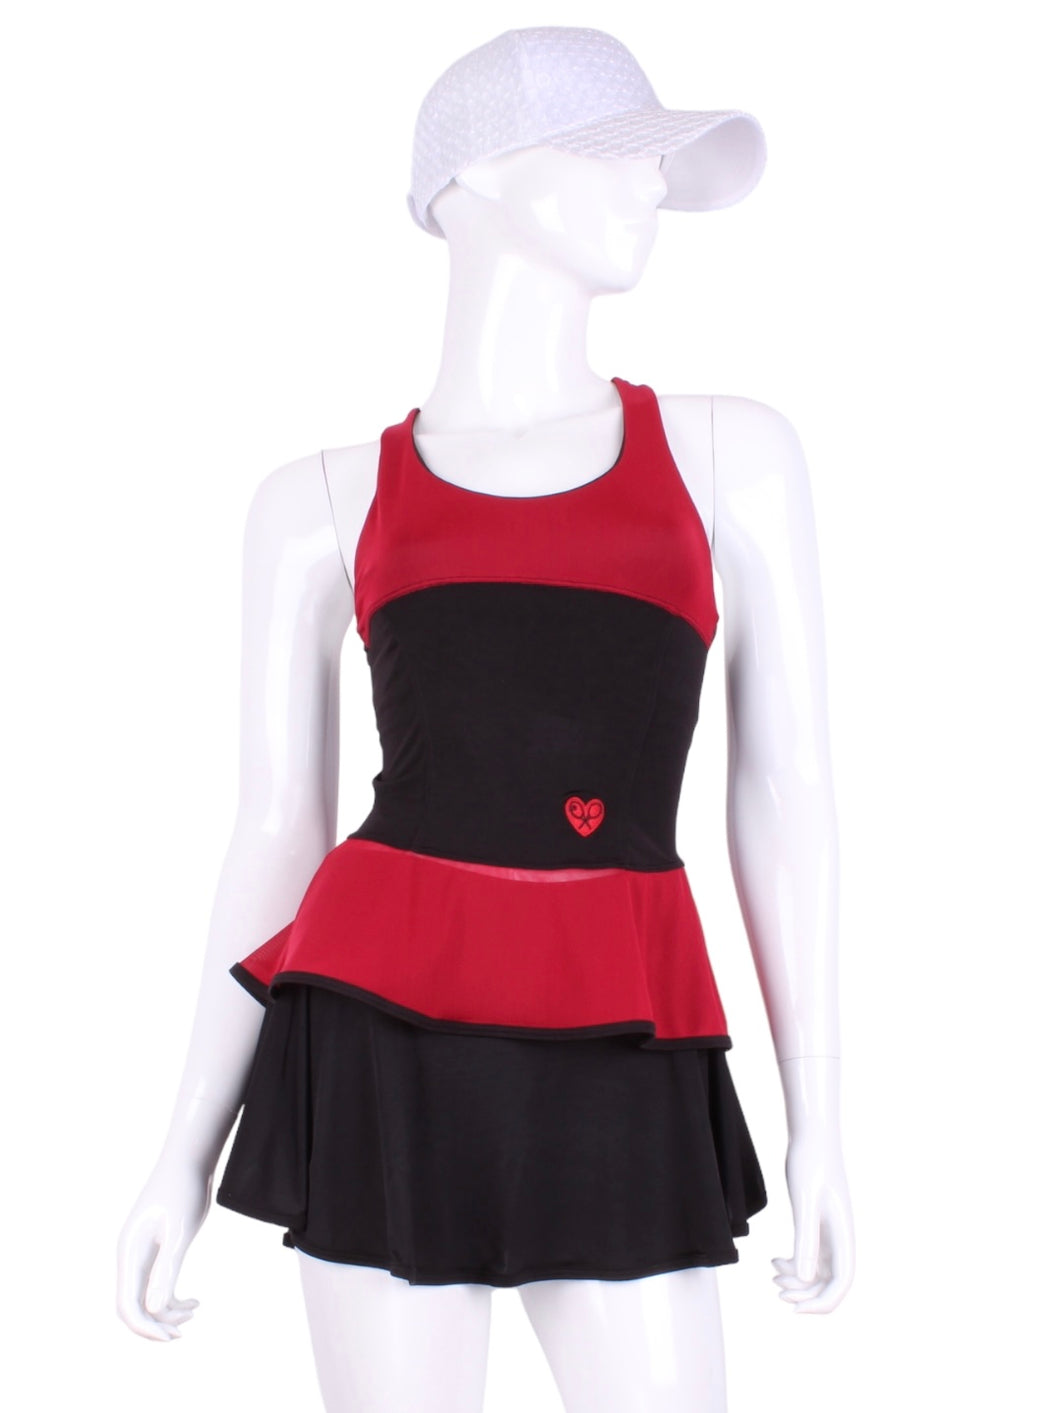 Ruffle Tank Tennis Top Black & Red Mesh. An elegant tennis ruffle top - silky soft - light - and quick-drying breathable fabric.   Scoop neckline front and crossed back with two-needle cover stitch at each seam.   Smooth binding finishes the edges with class.  The most comfortable and feminine tennis top.  These pieces run small for a more petite woman - under 5’8” - for the medium max 34 D